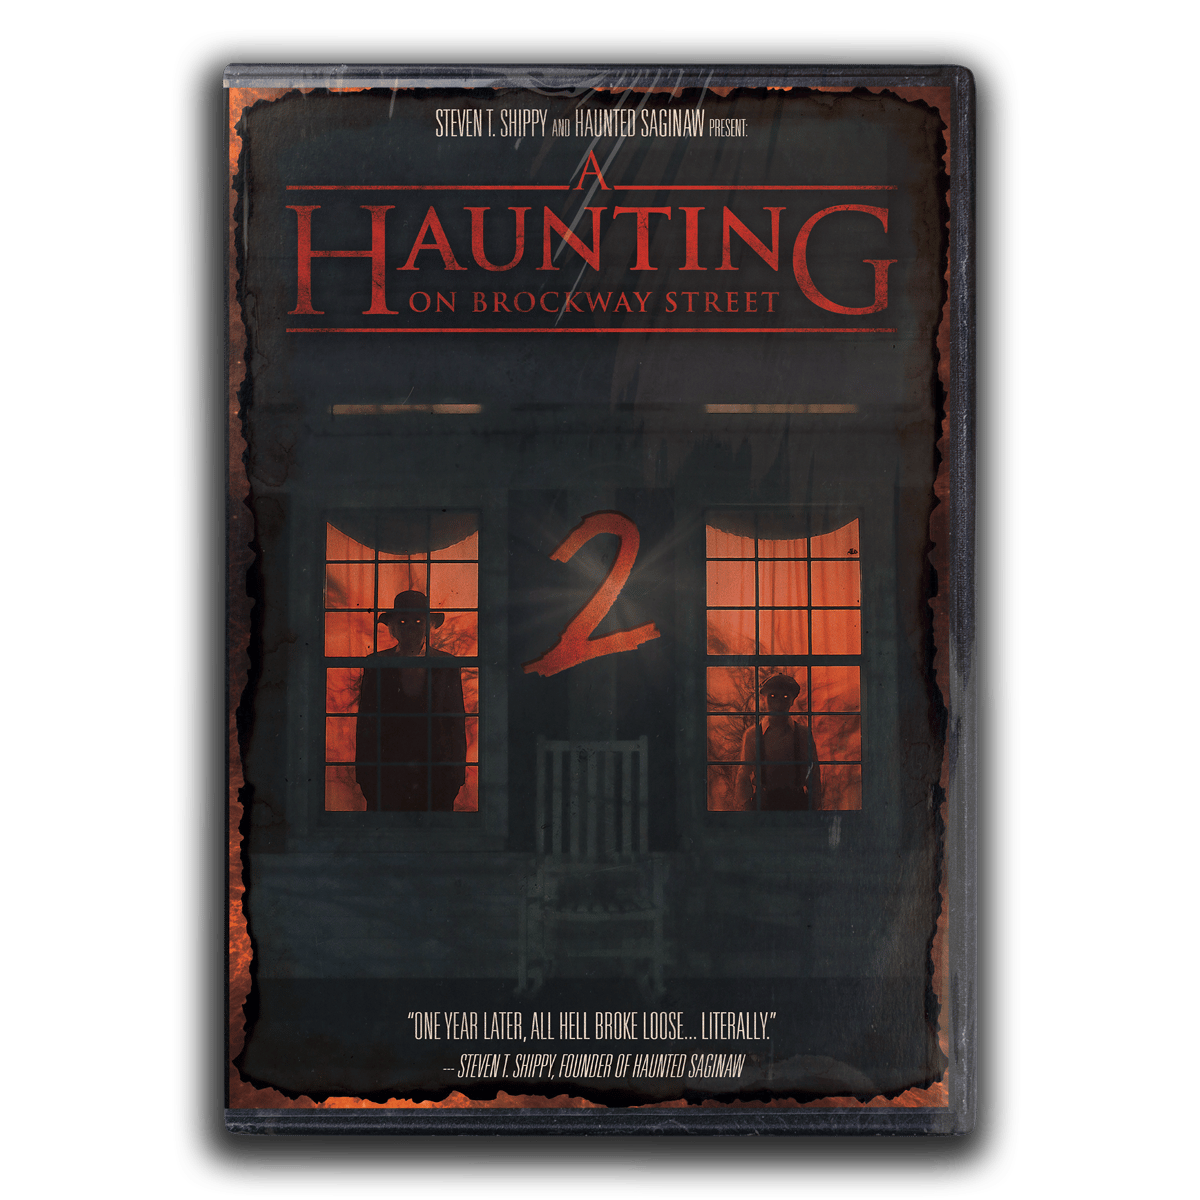 A Haunting on Brockway Street 2 DVD (The 12th Film)